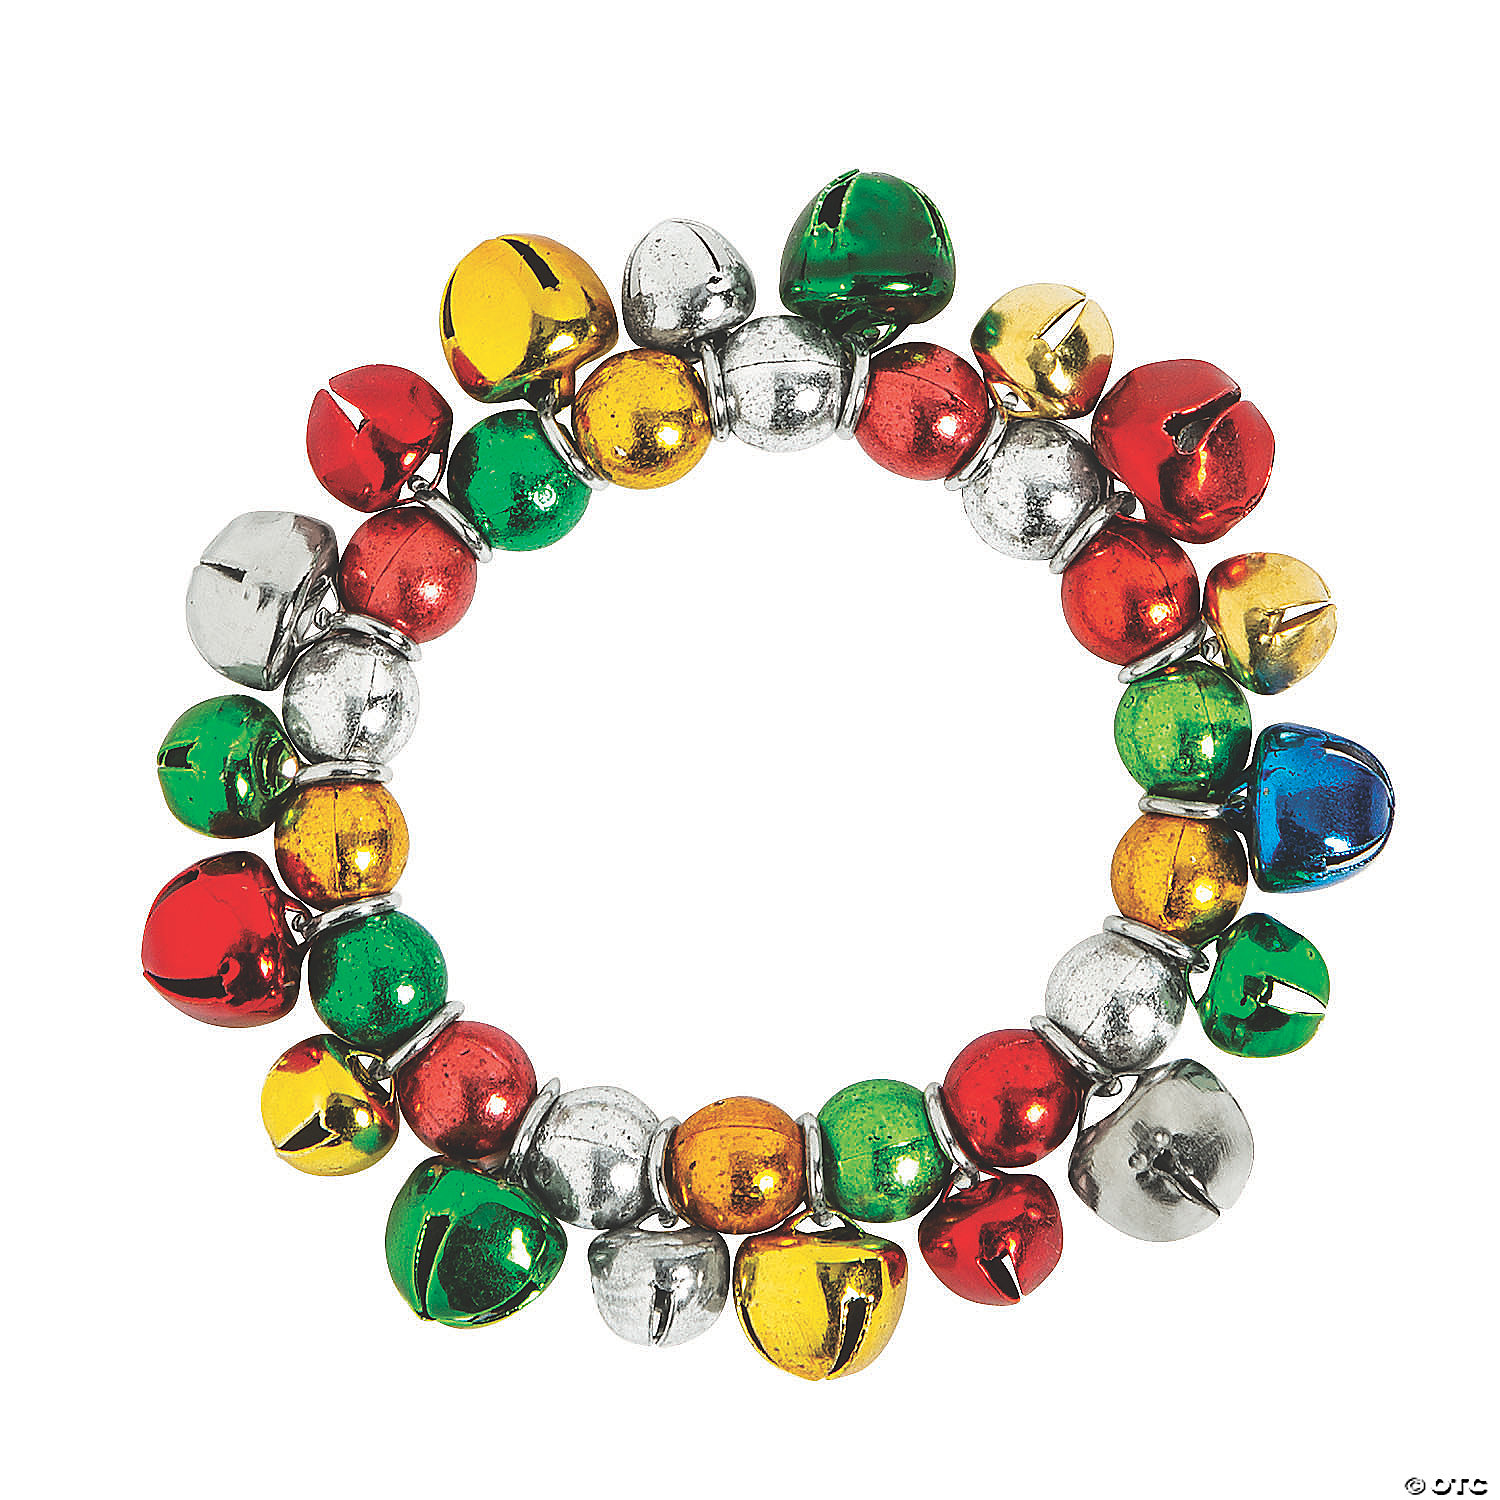 30 Pieces Christmas Jingle Bell Bracelets Kids Adjustable Jingle Bell Wrist Band Small Green Red and Gold Metal Bells Bracelets for Christmas Party Gift Baby Toddler 